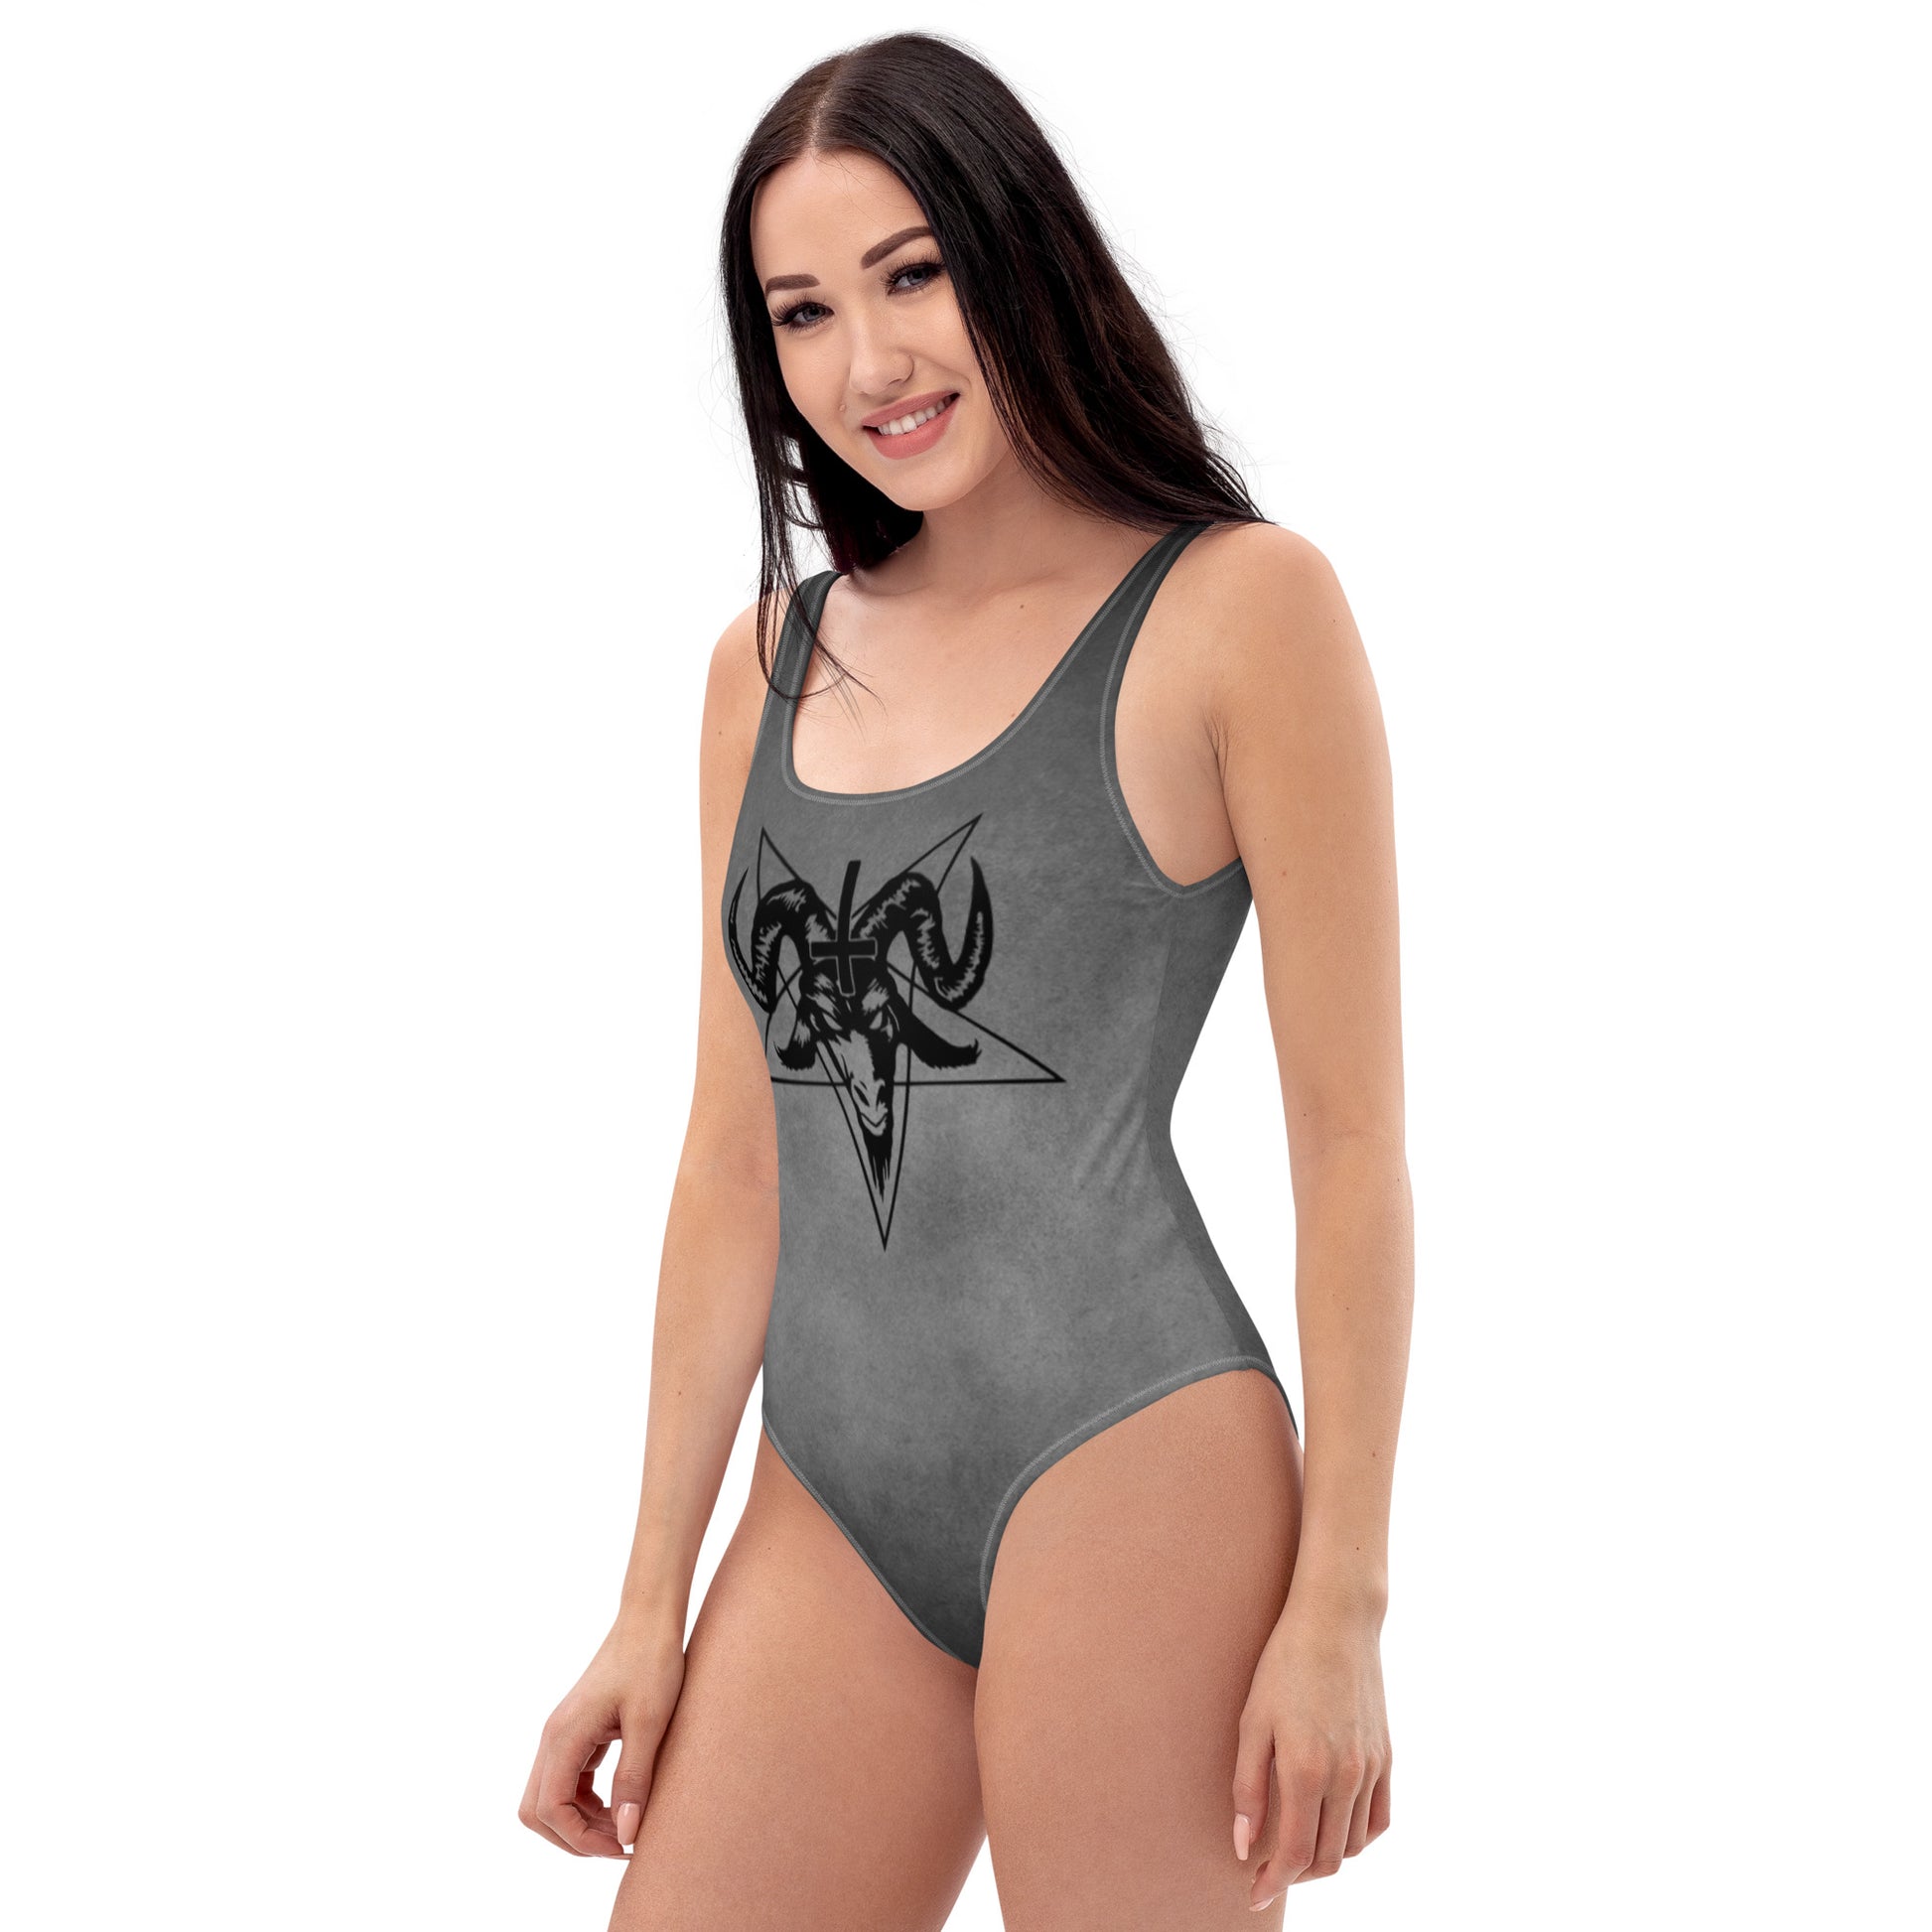 Gray One Piece Swimsuit / Baphomet Clothing / Plus Size Goth Swimsuit / Goth Swimwear For Women